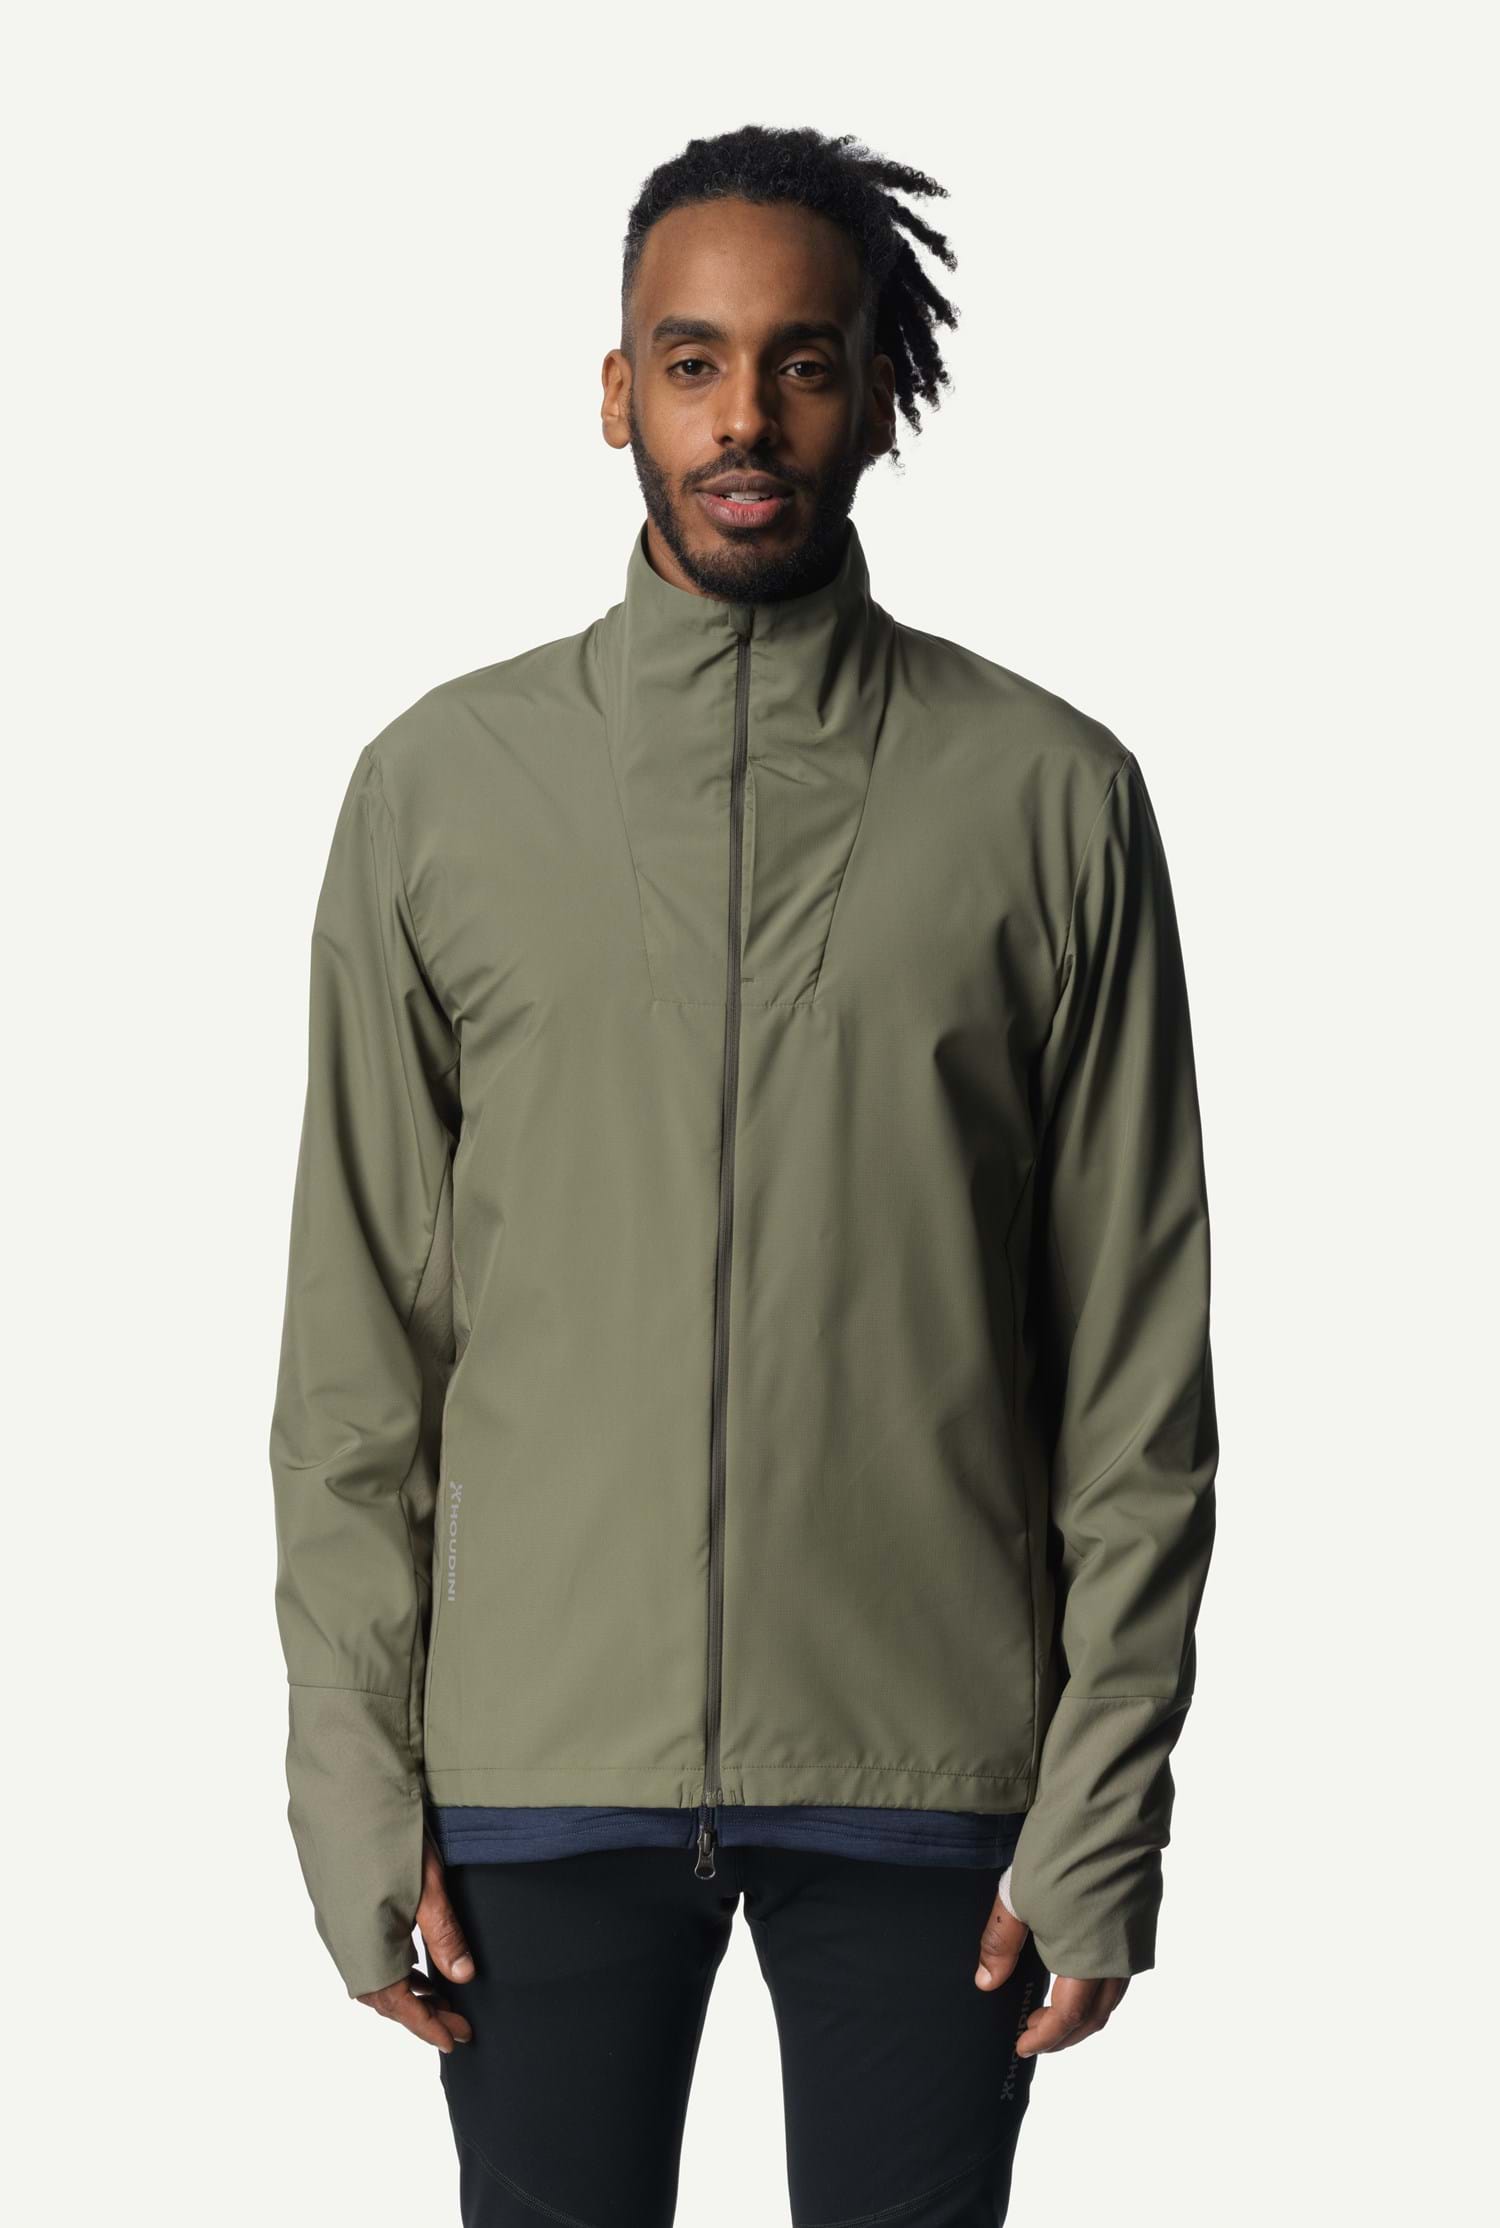 Image of Houdini M's Pace Wind Jacket, Sage Green, XS